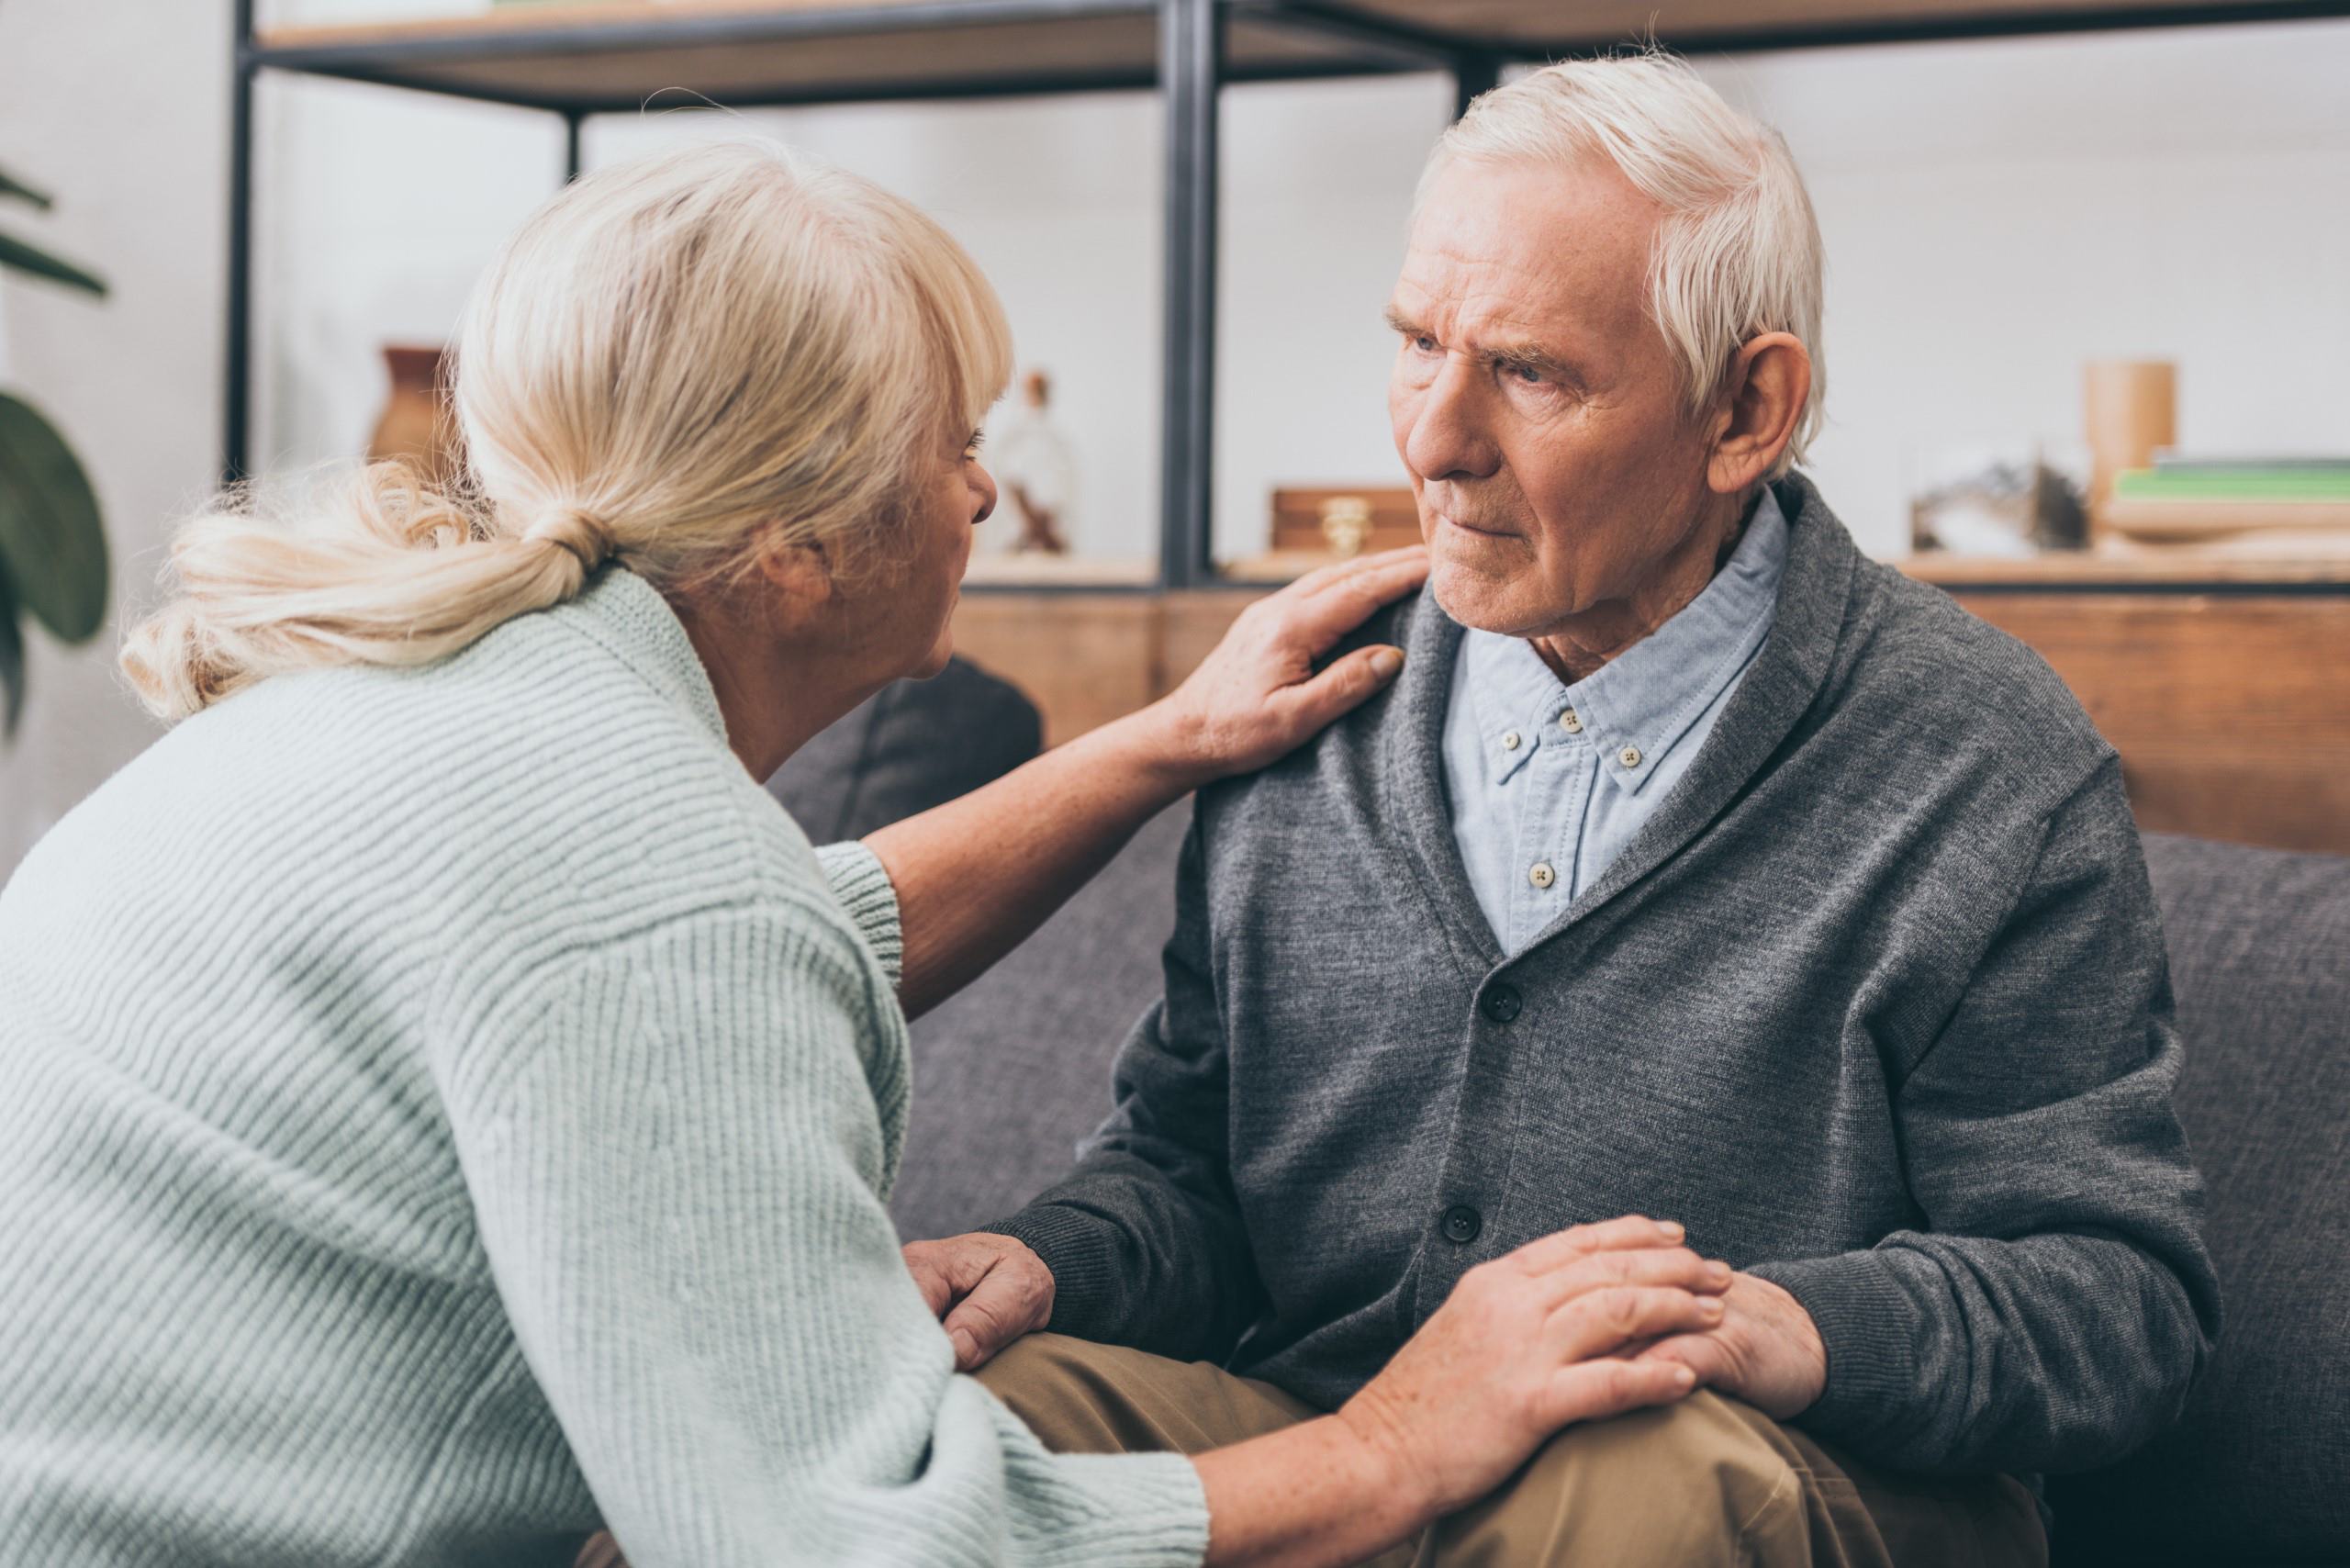 A woman comforting a man who has dementia